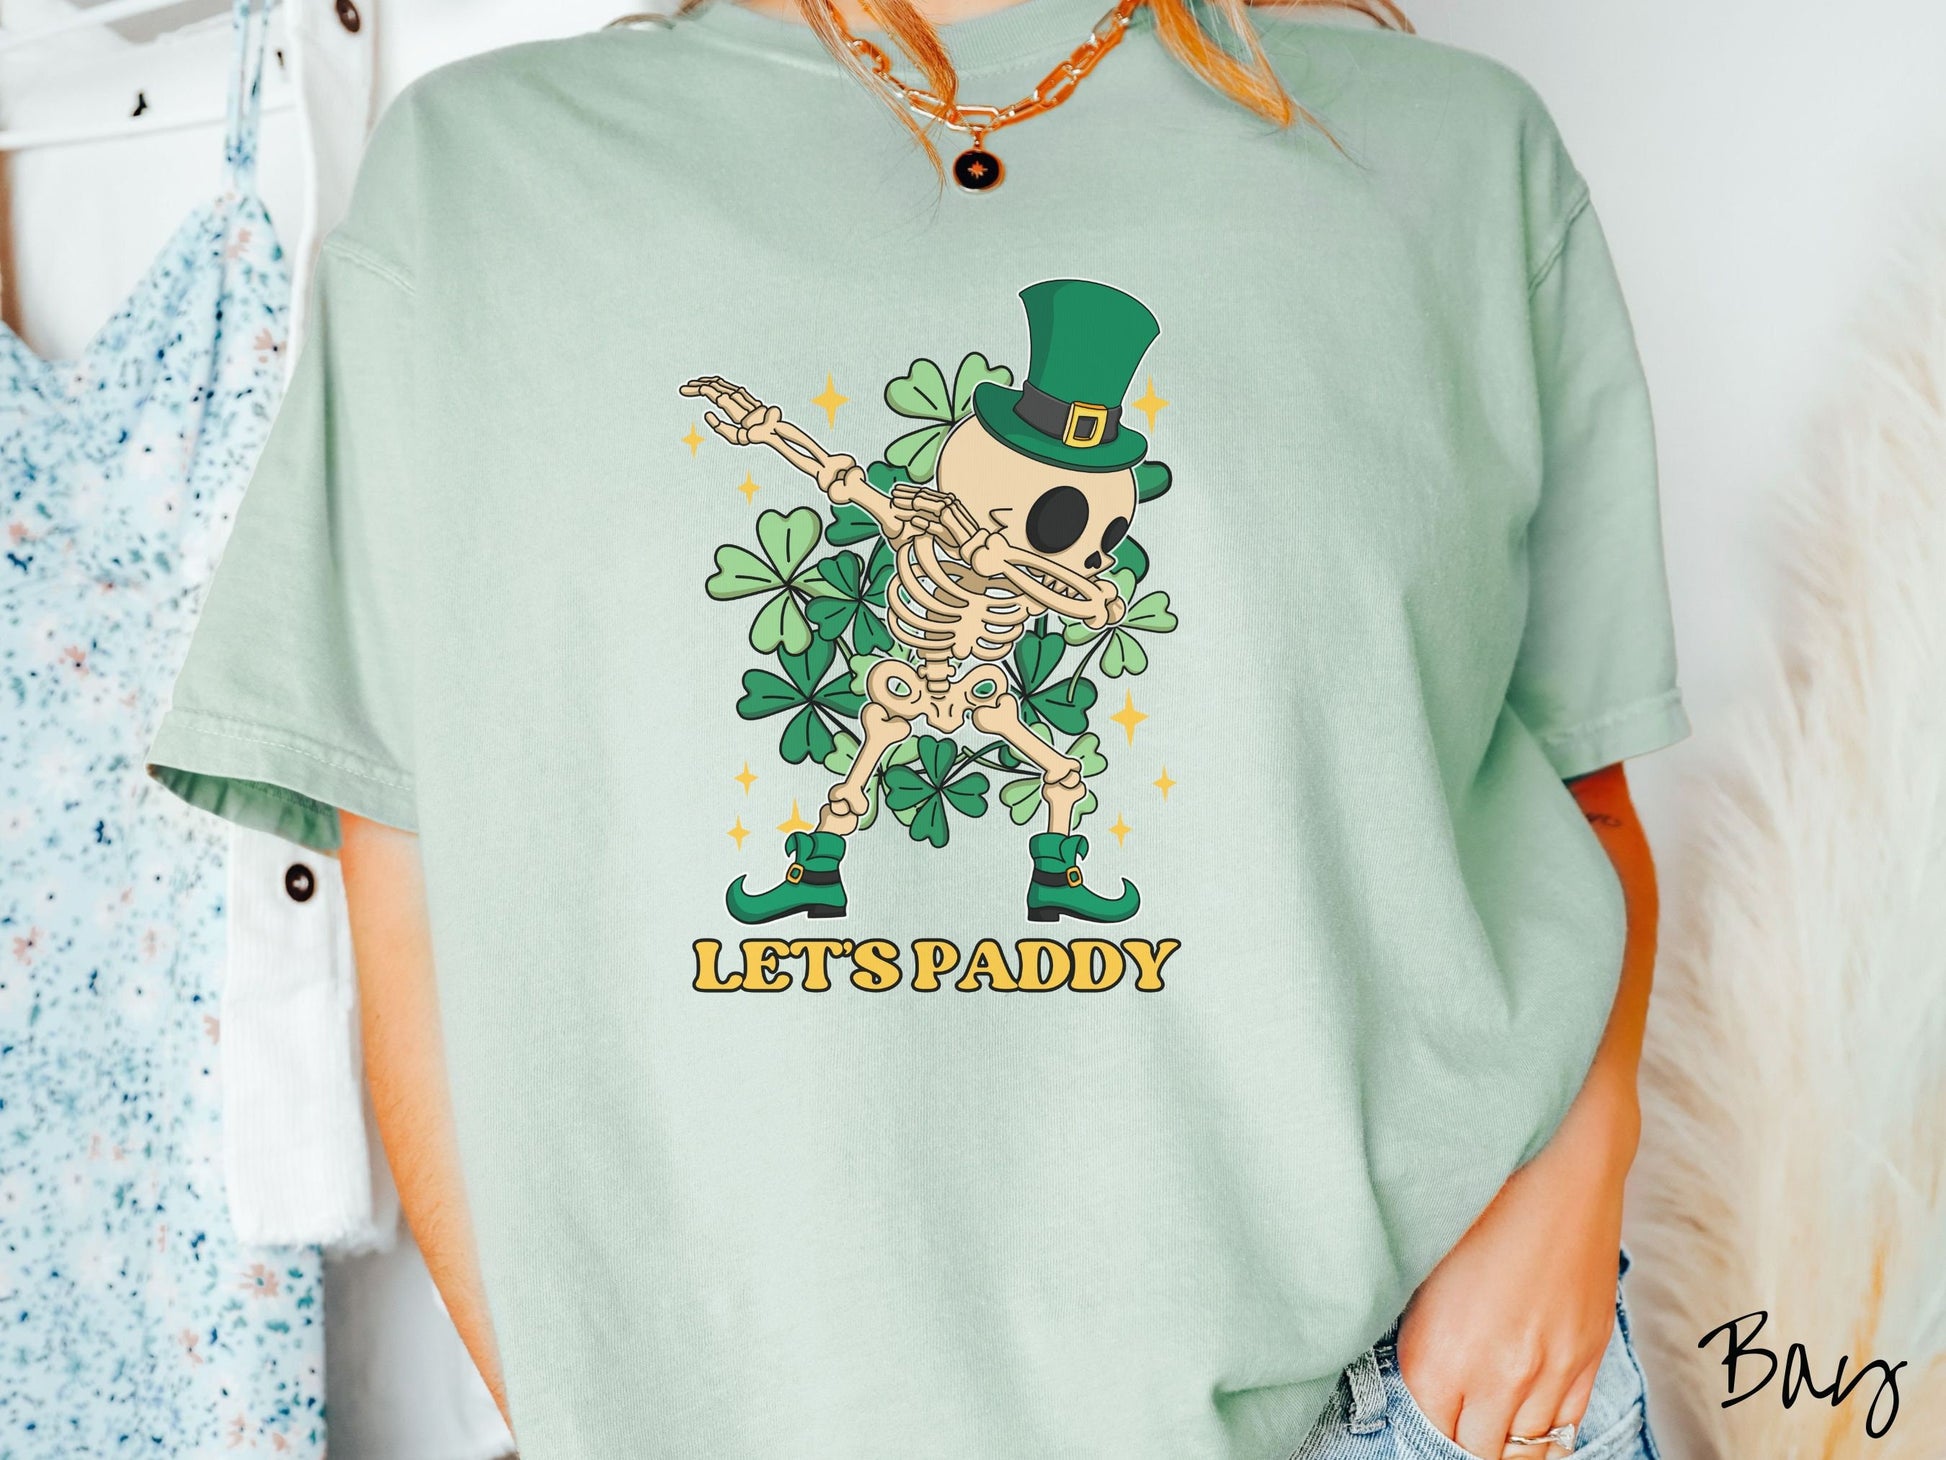 A woman wearing a vintage, bay colored shirt with the text Lets Paddy and below that is a leprechaun wearing a green top hat and green elf shoes doing the dab dance and there are green clovers and golden stars in the background.